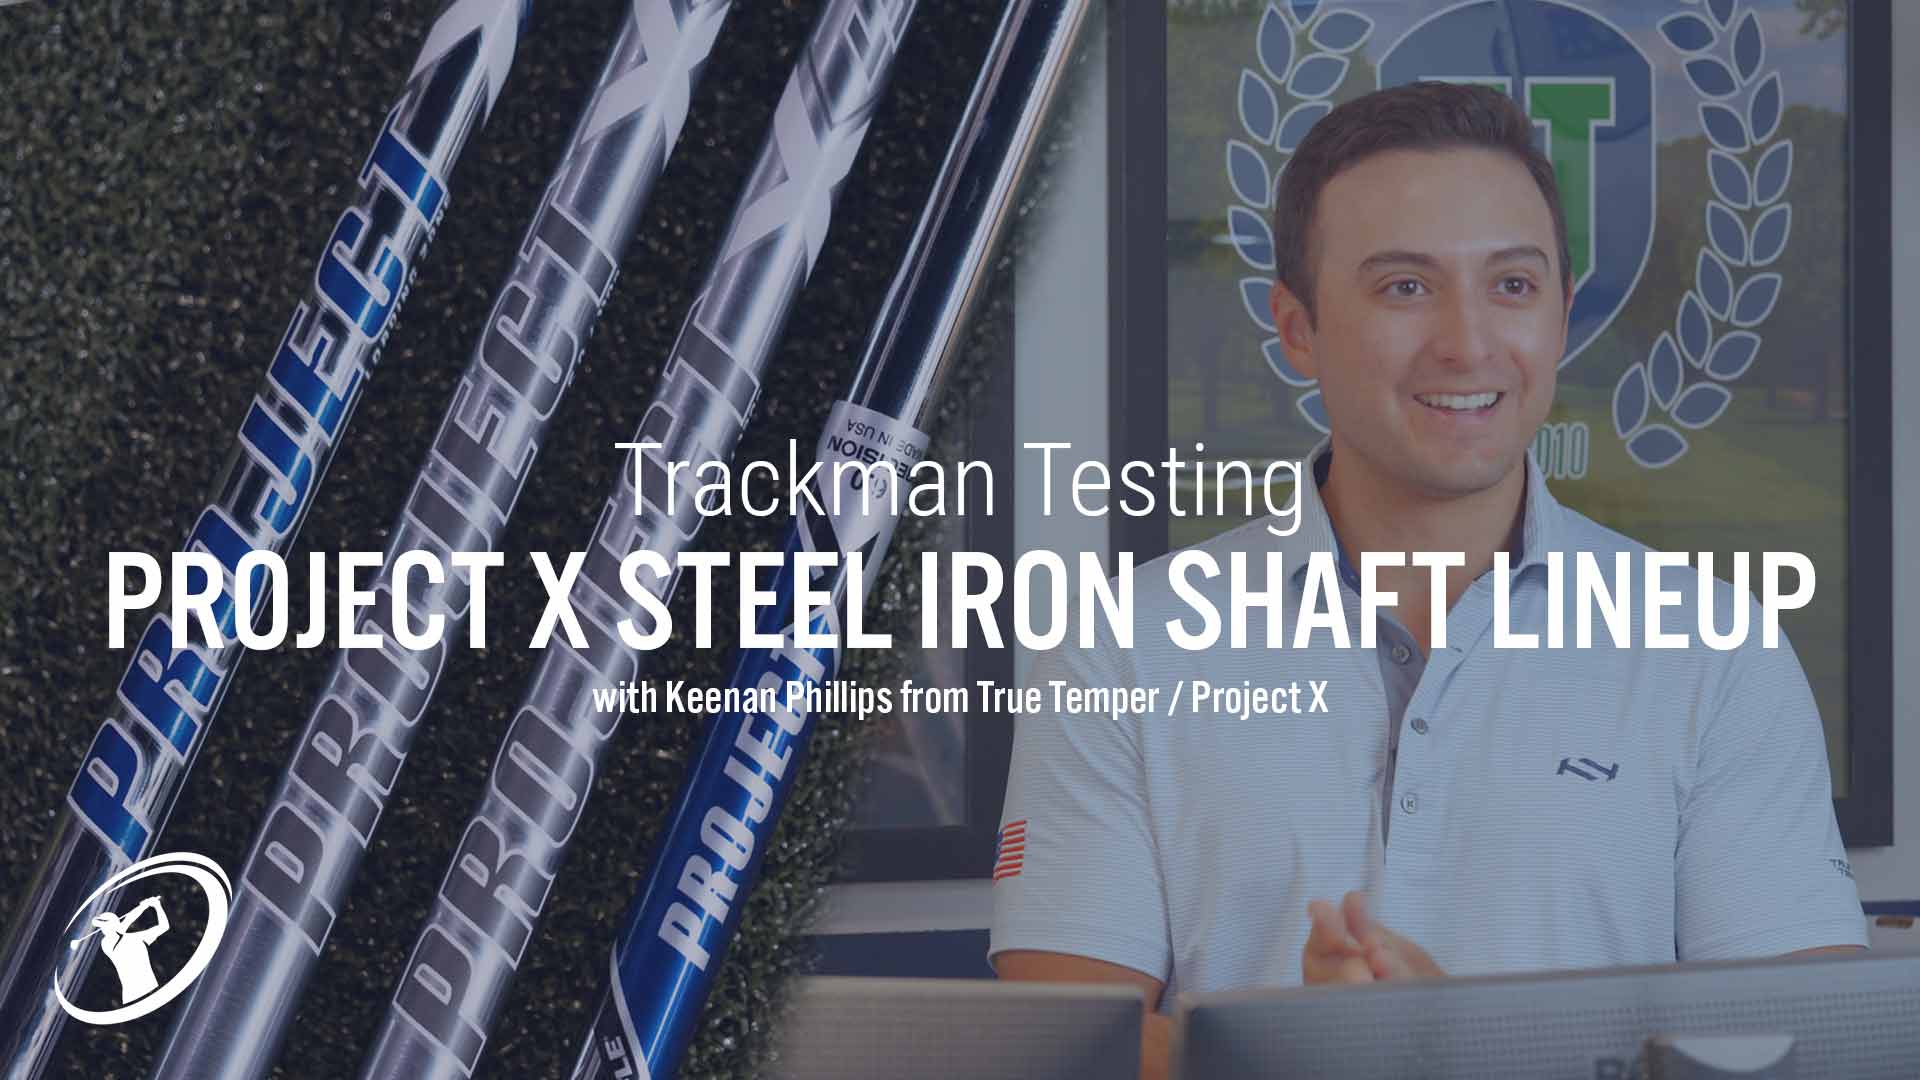 PROJECT X Steel Iron Shaft Lineup Testing with True Temper's Keenan Phillips